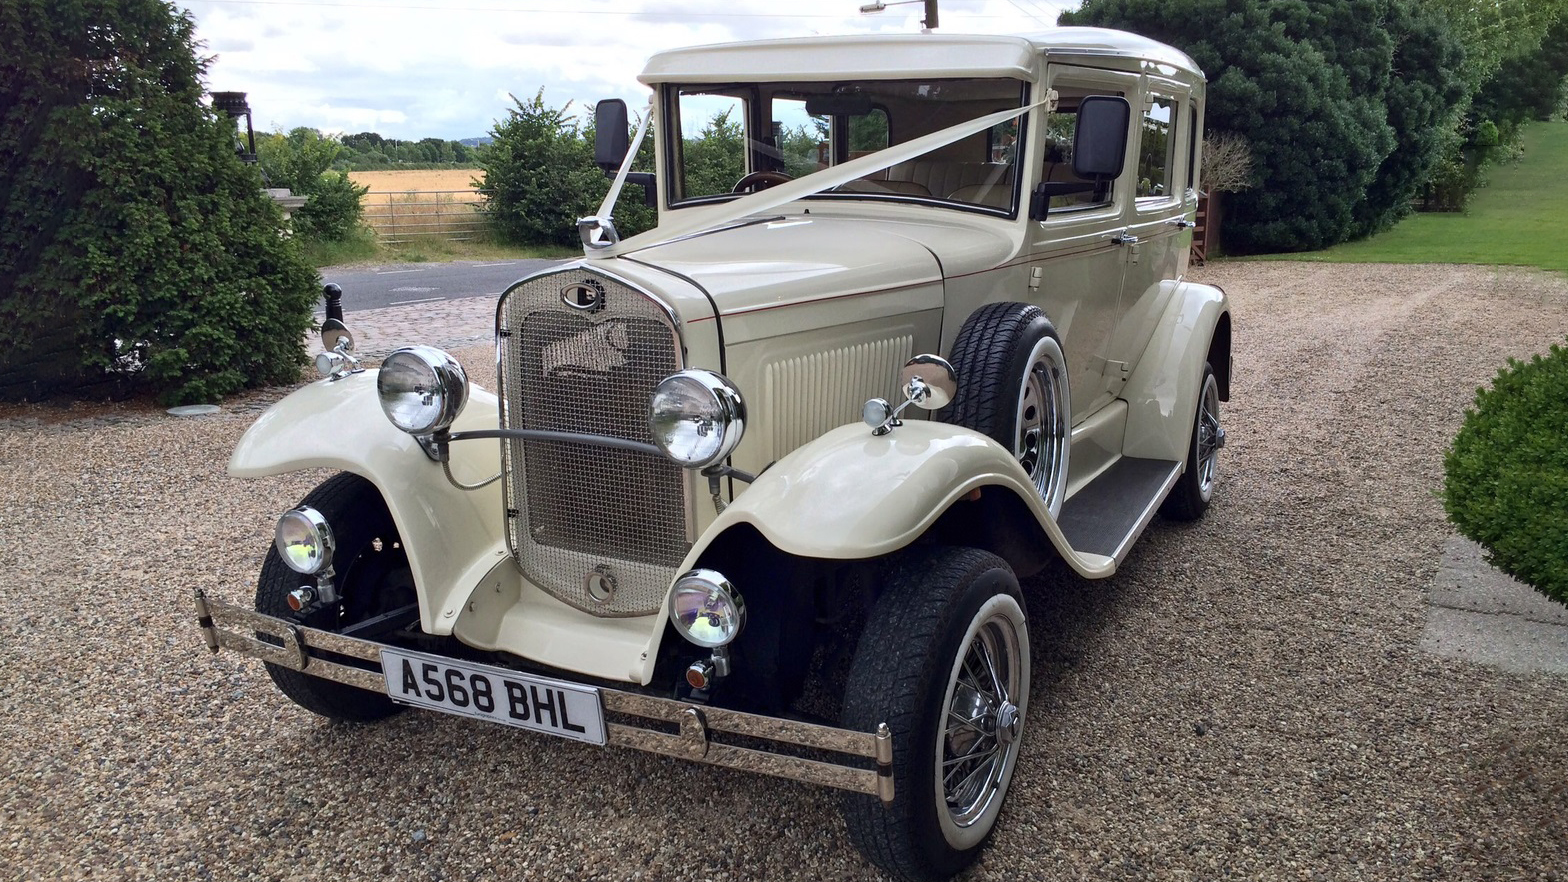 Barnsdale Saloon wedding car for hire in East London 